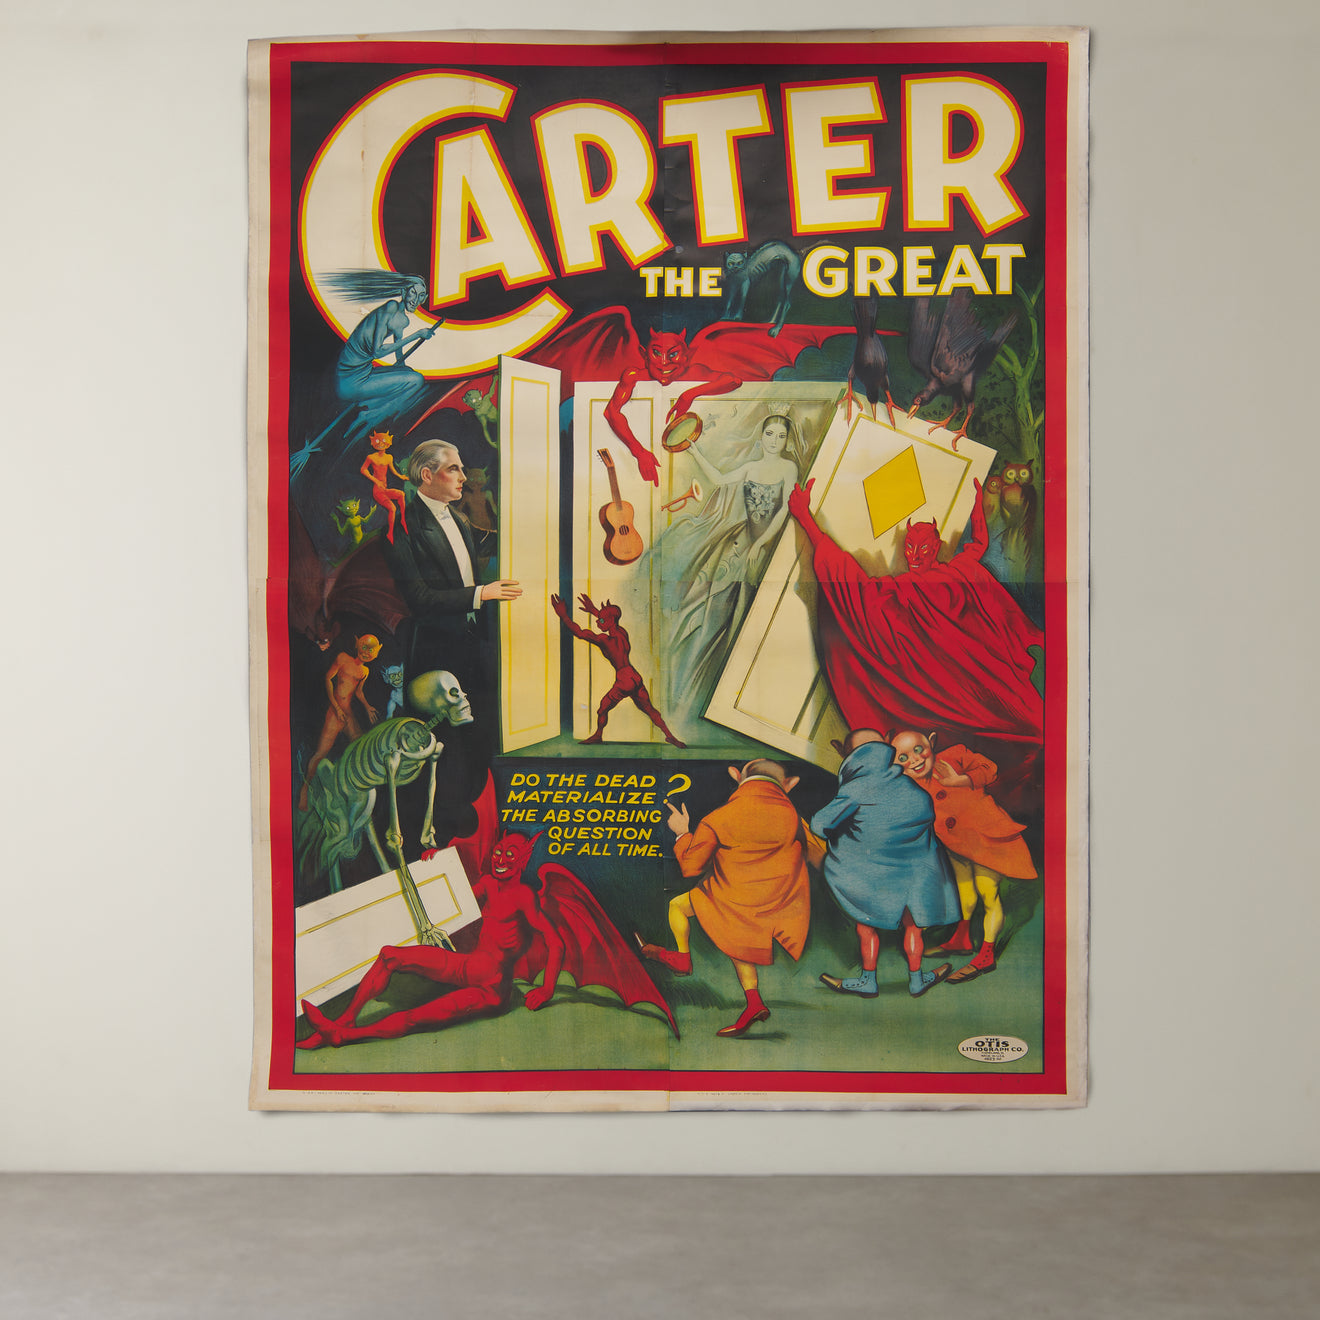 MASSIVE 4 - QUAD CARTER THE GREAT VINTAGE THEATER POSTER